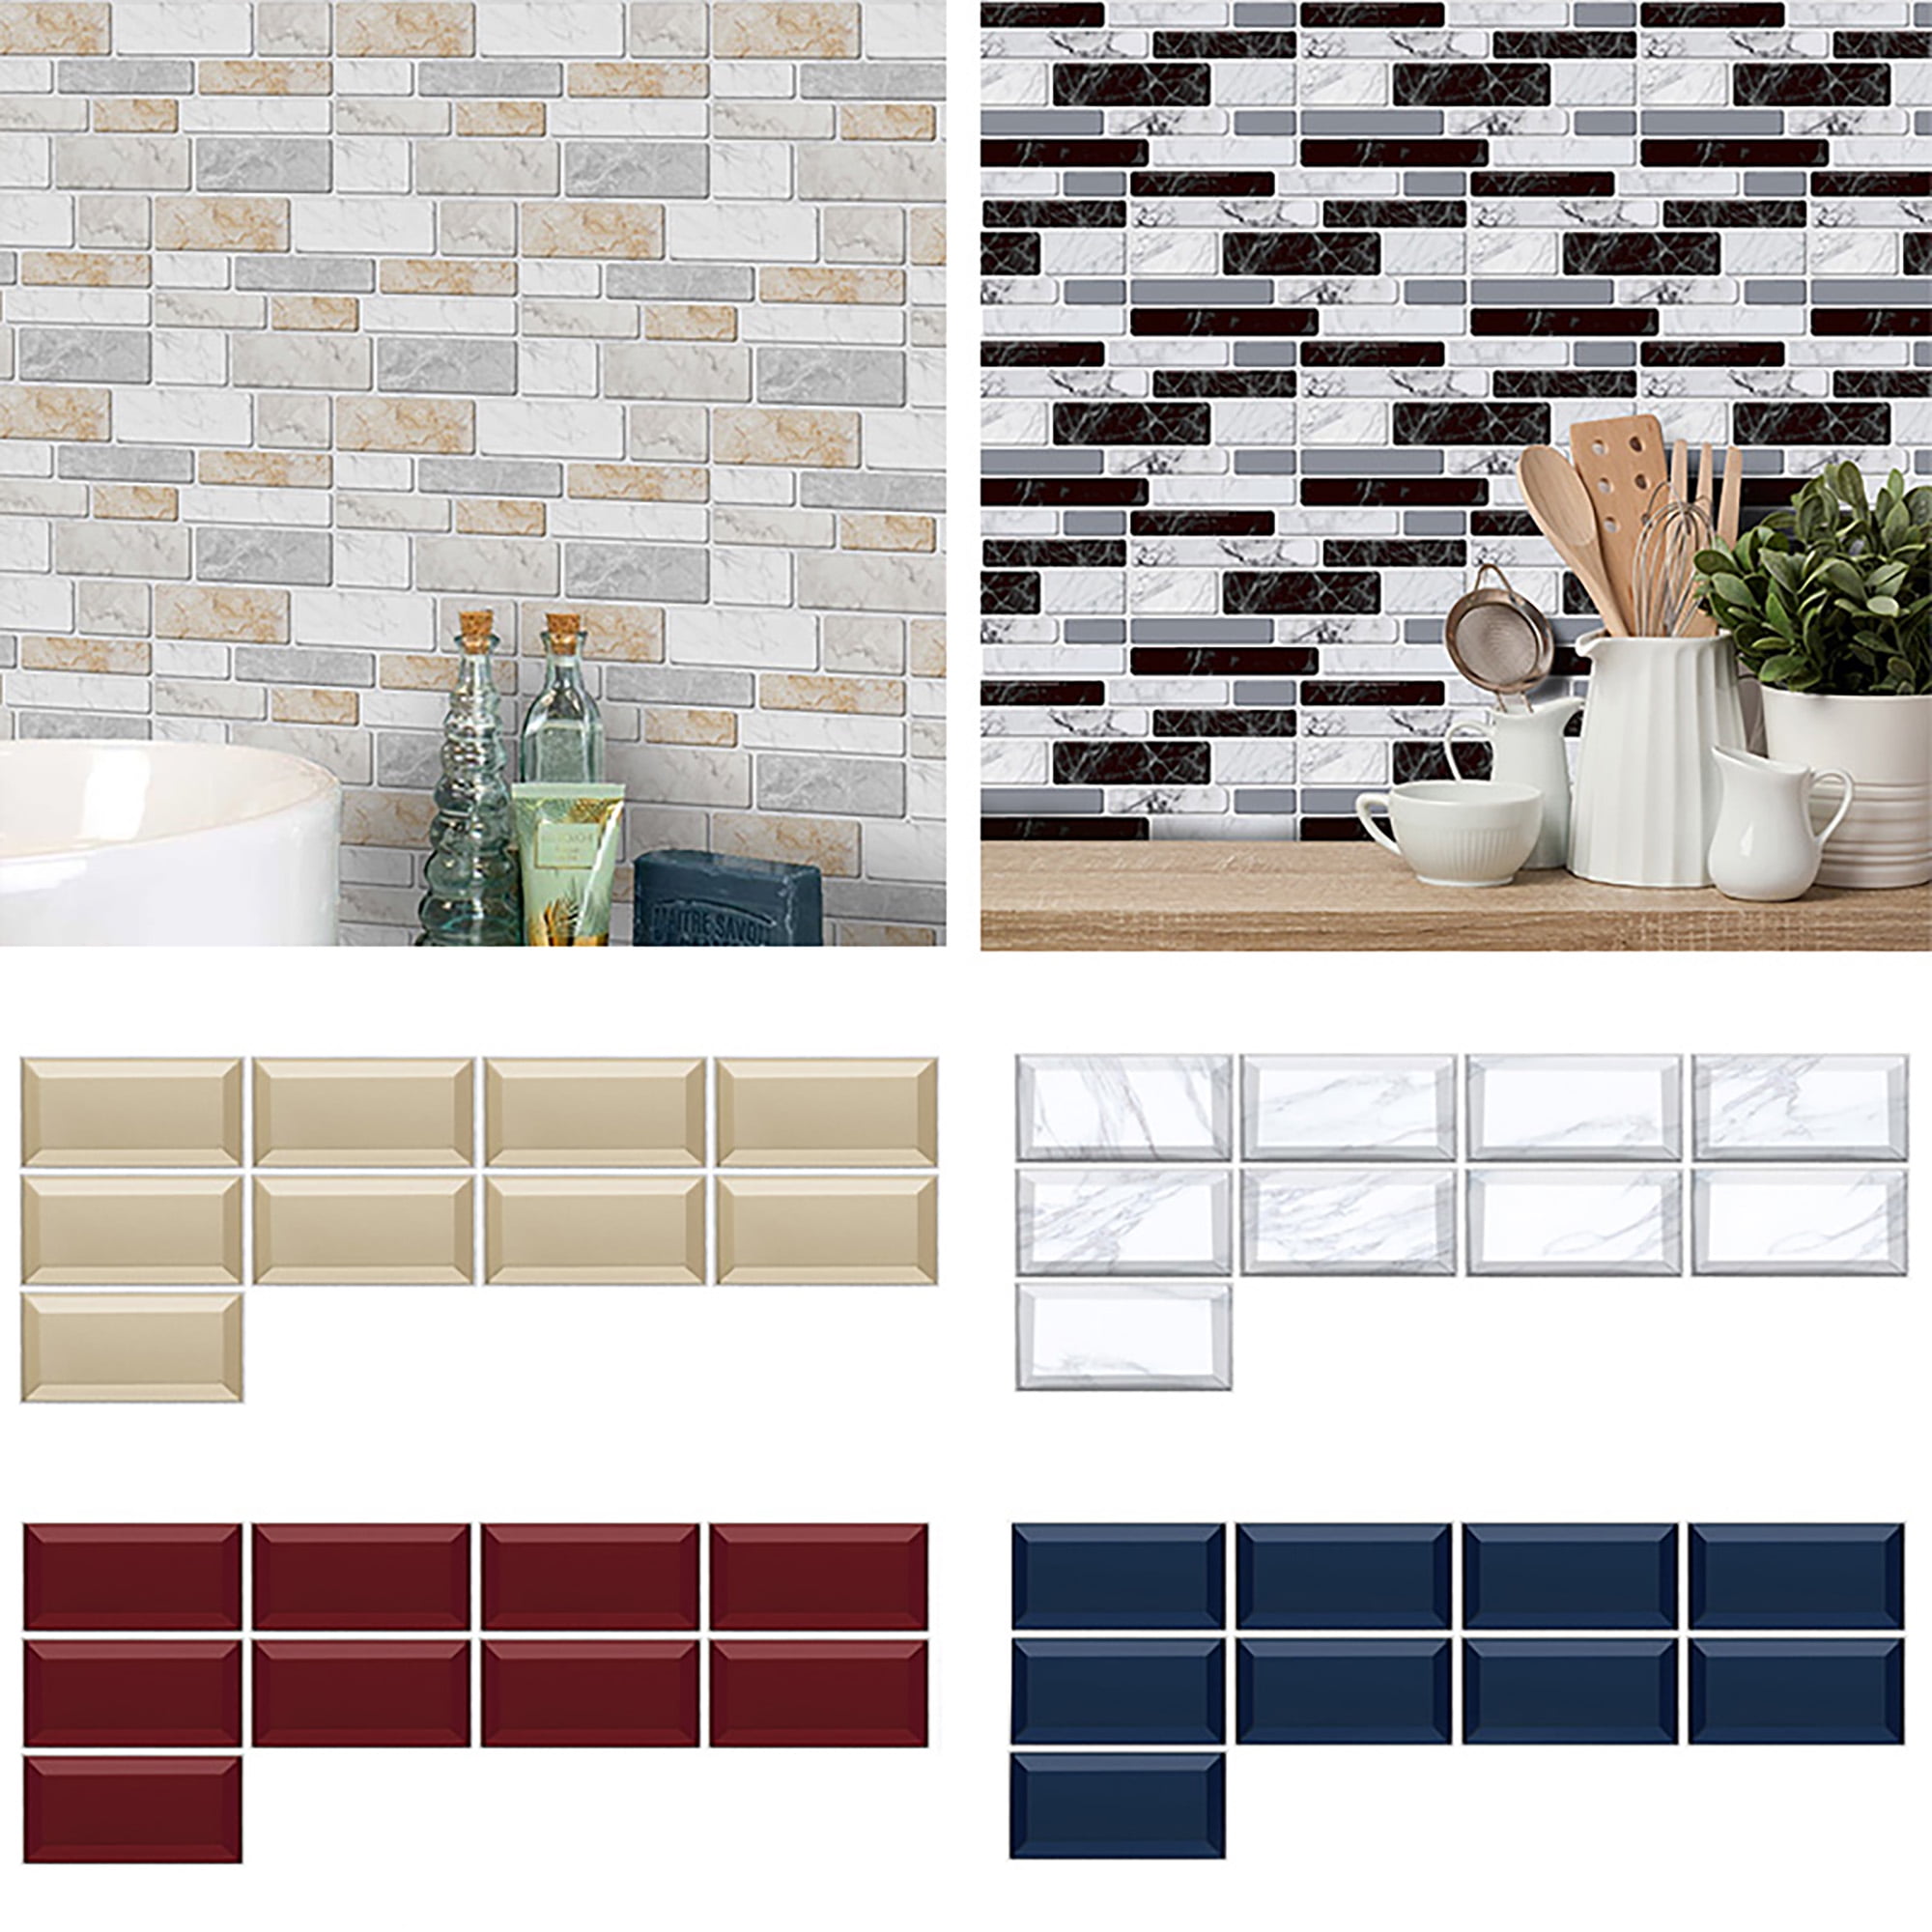 7.87”x3.94” Not Textured Raised Tiles Faux 3D Self-Adhesive Wall Stickers in Black Terrazzo Pattern Stick On Backsplash for Kitchen 27-Sheet Peel and Stick Decorative Tiles